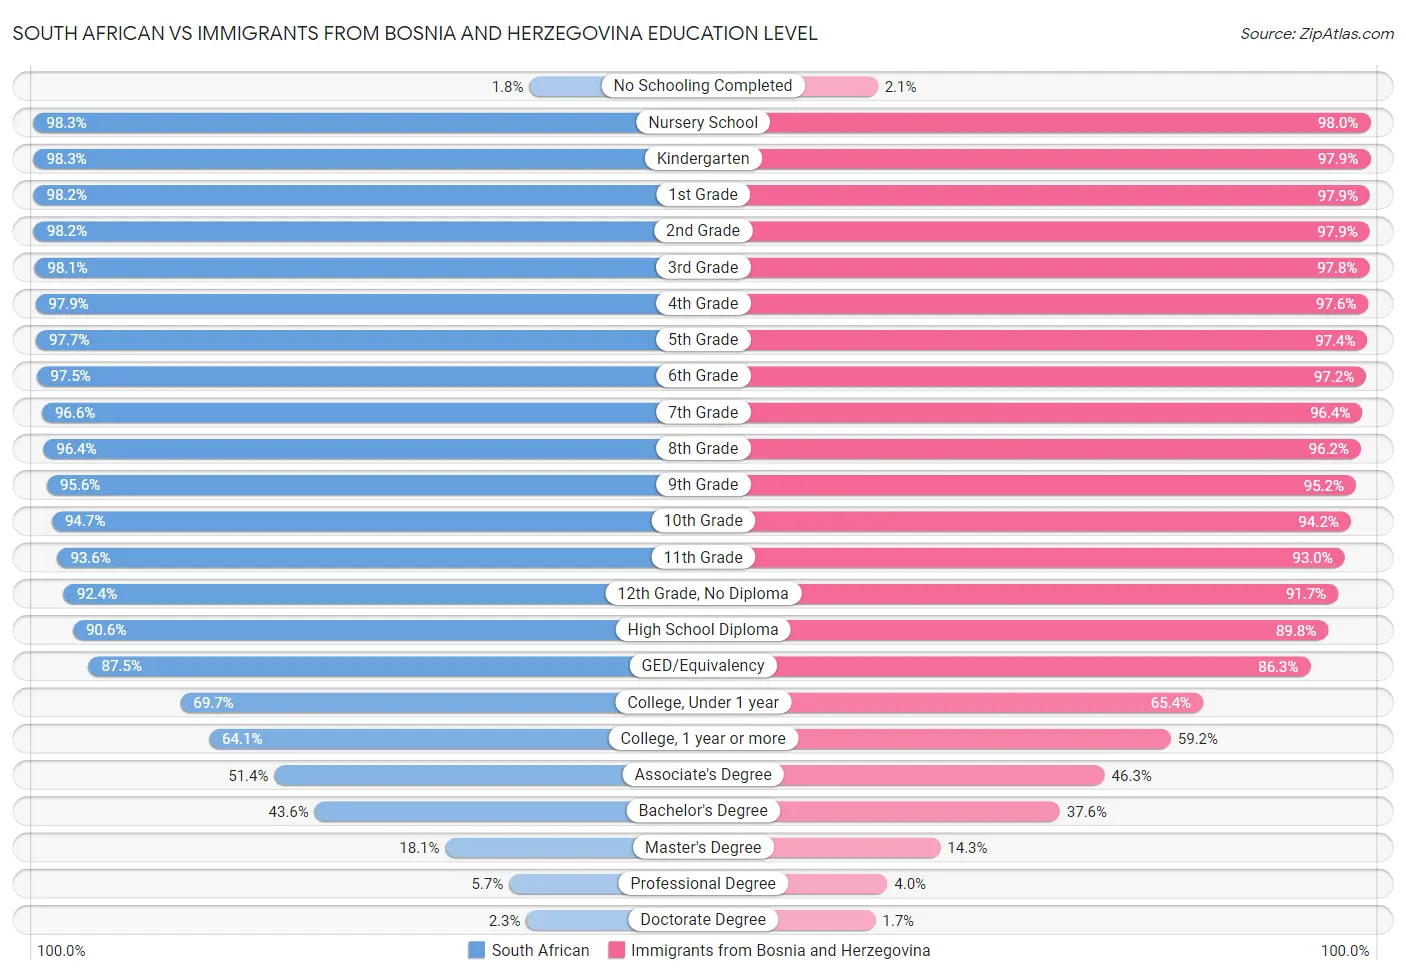 South African vs Immigrants from Bosnia and Herzegovina Education Level